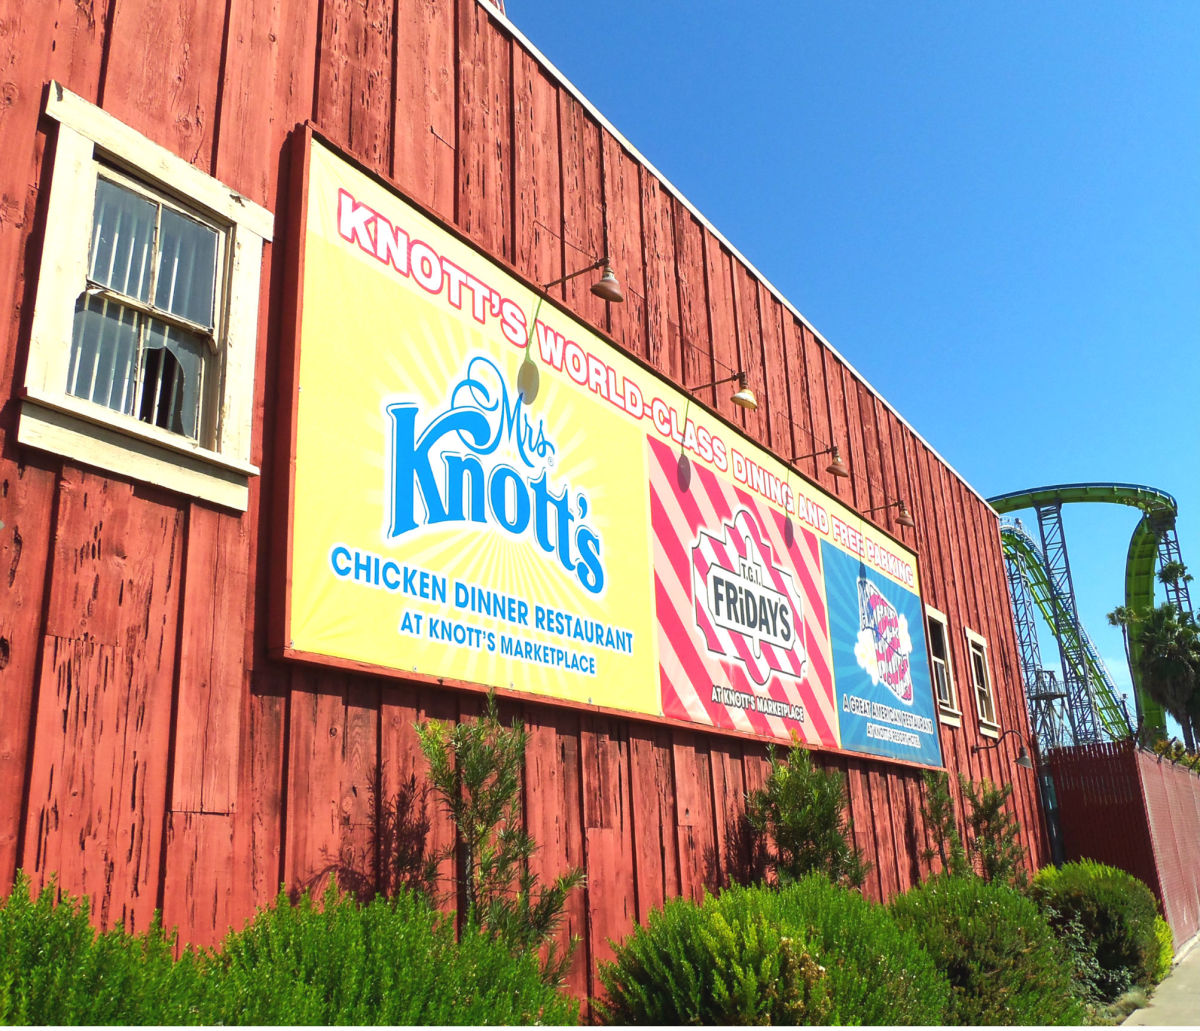 Knott's Berry Farm - Directions, Photos, Review - General Information